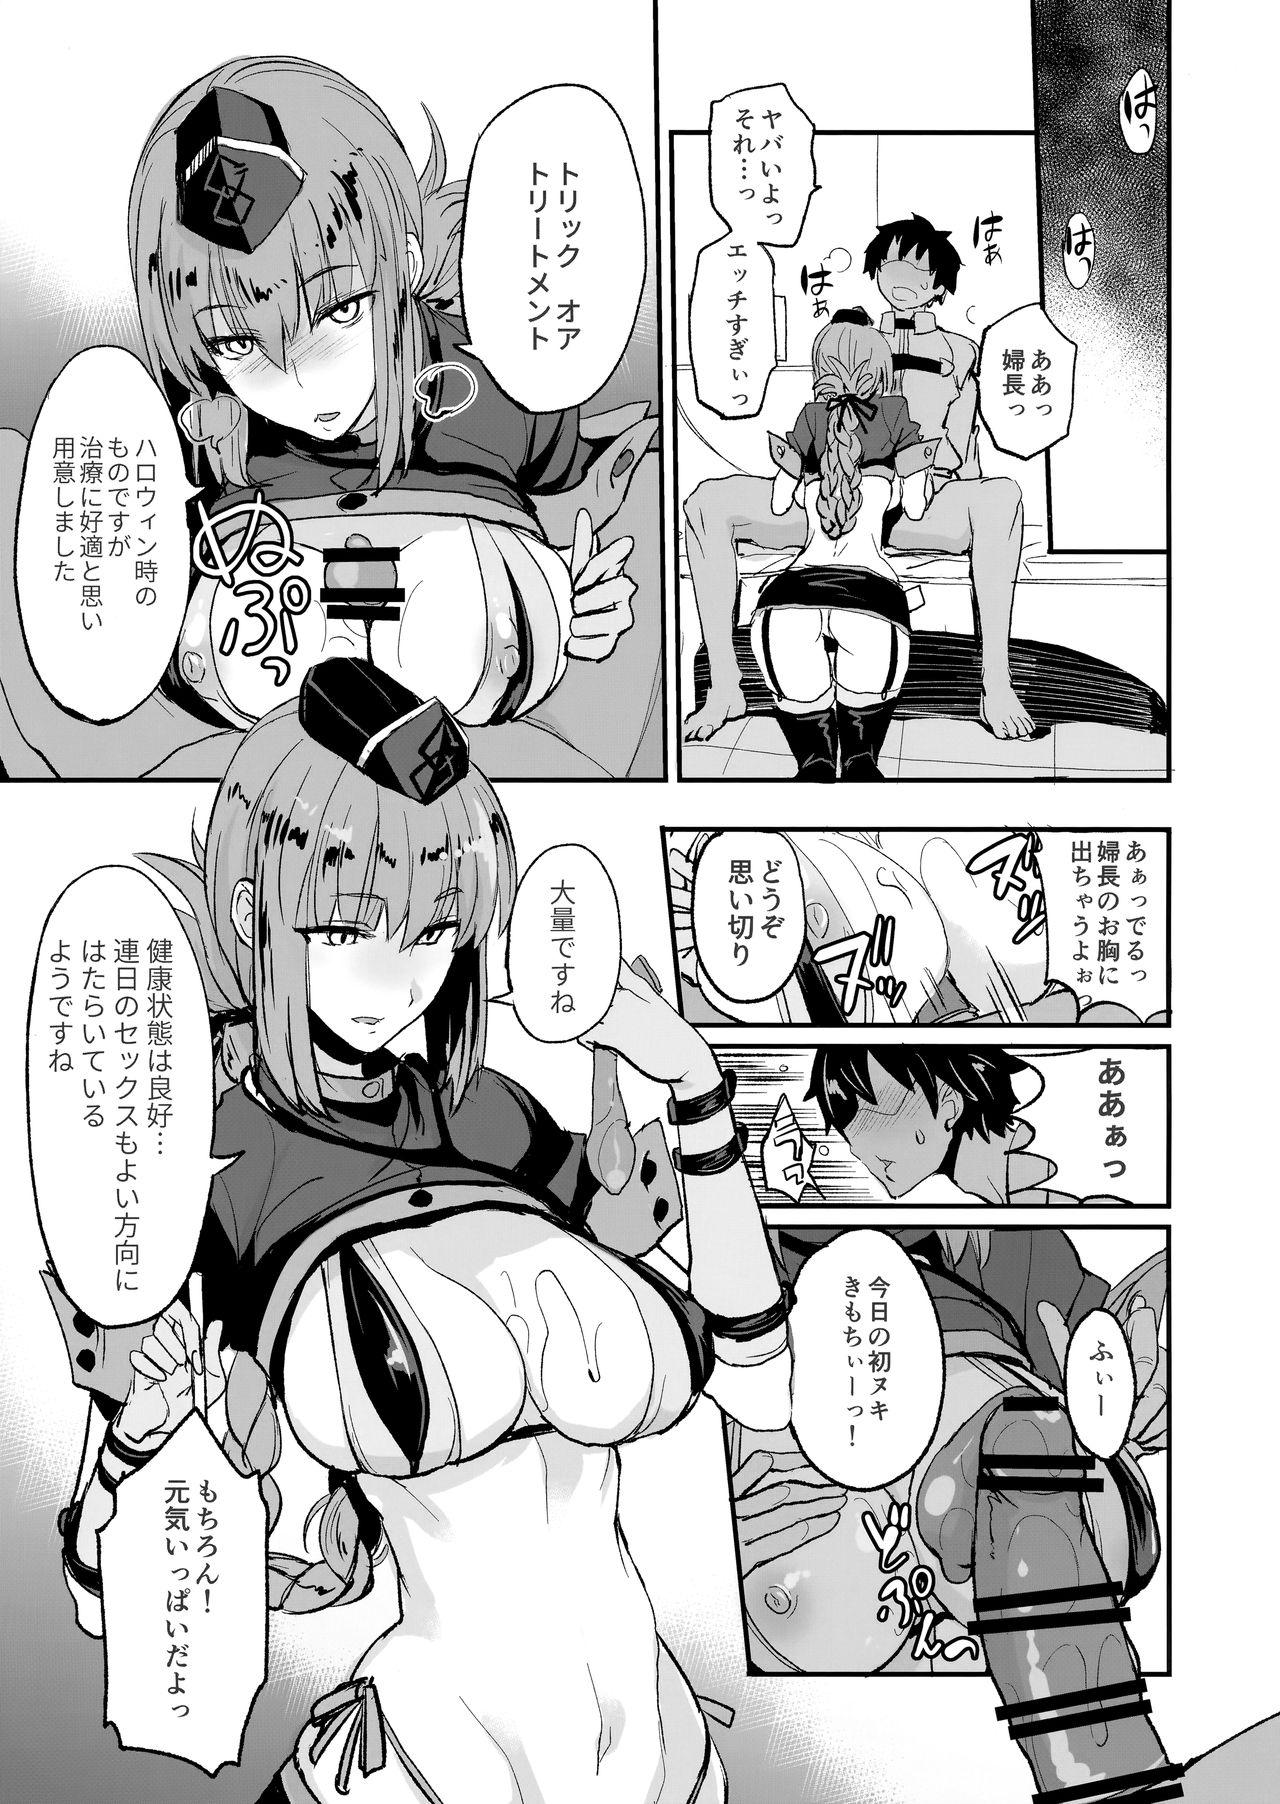 Stepsiblings FGO no Erohon 2 - Fate grand order Doggystyle Porn - Page 4